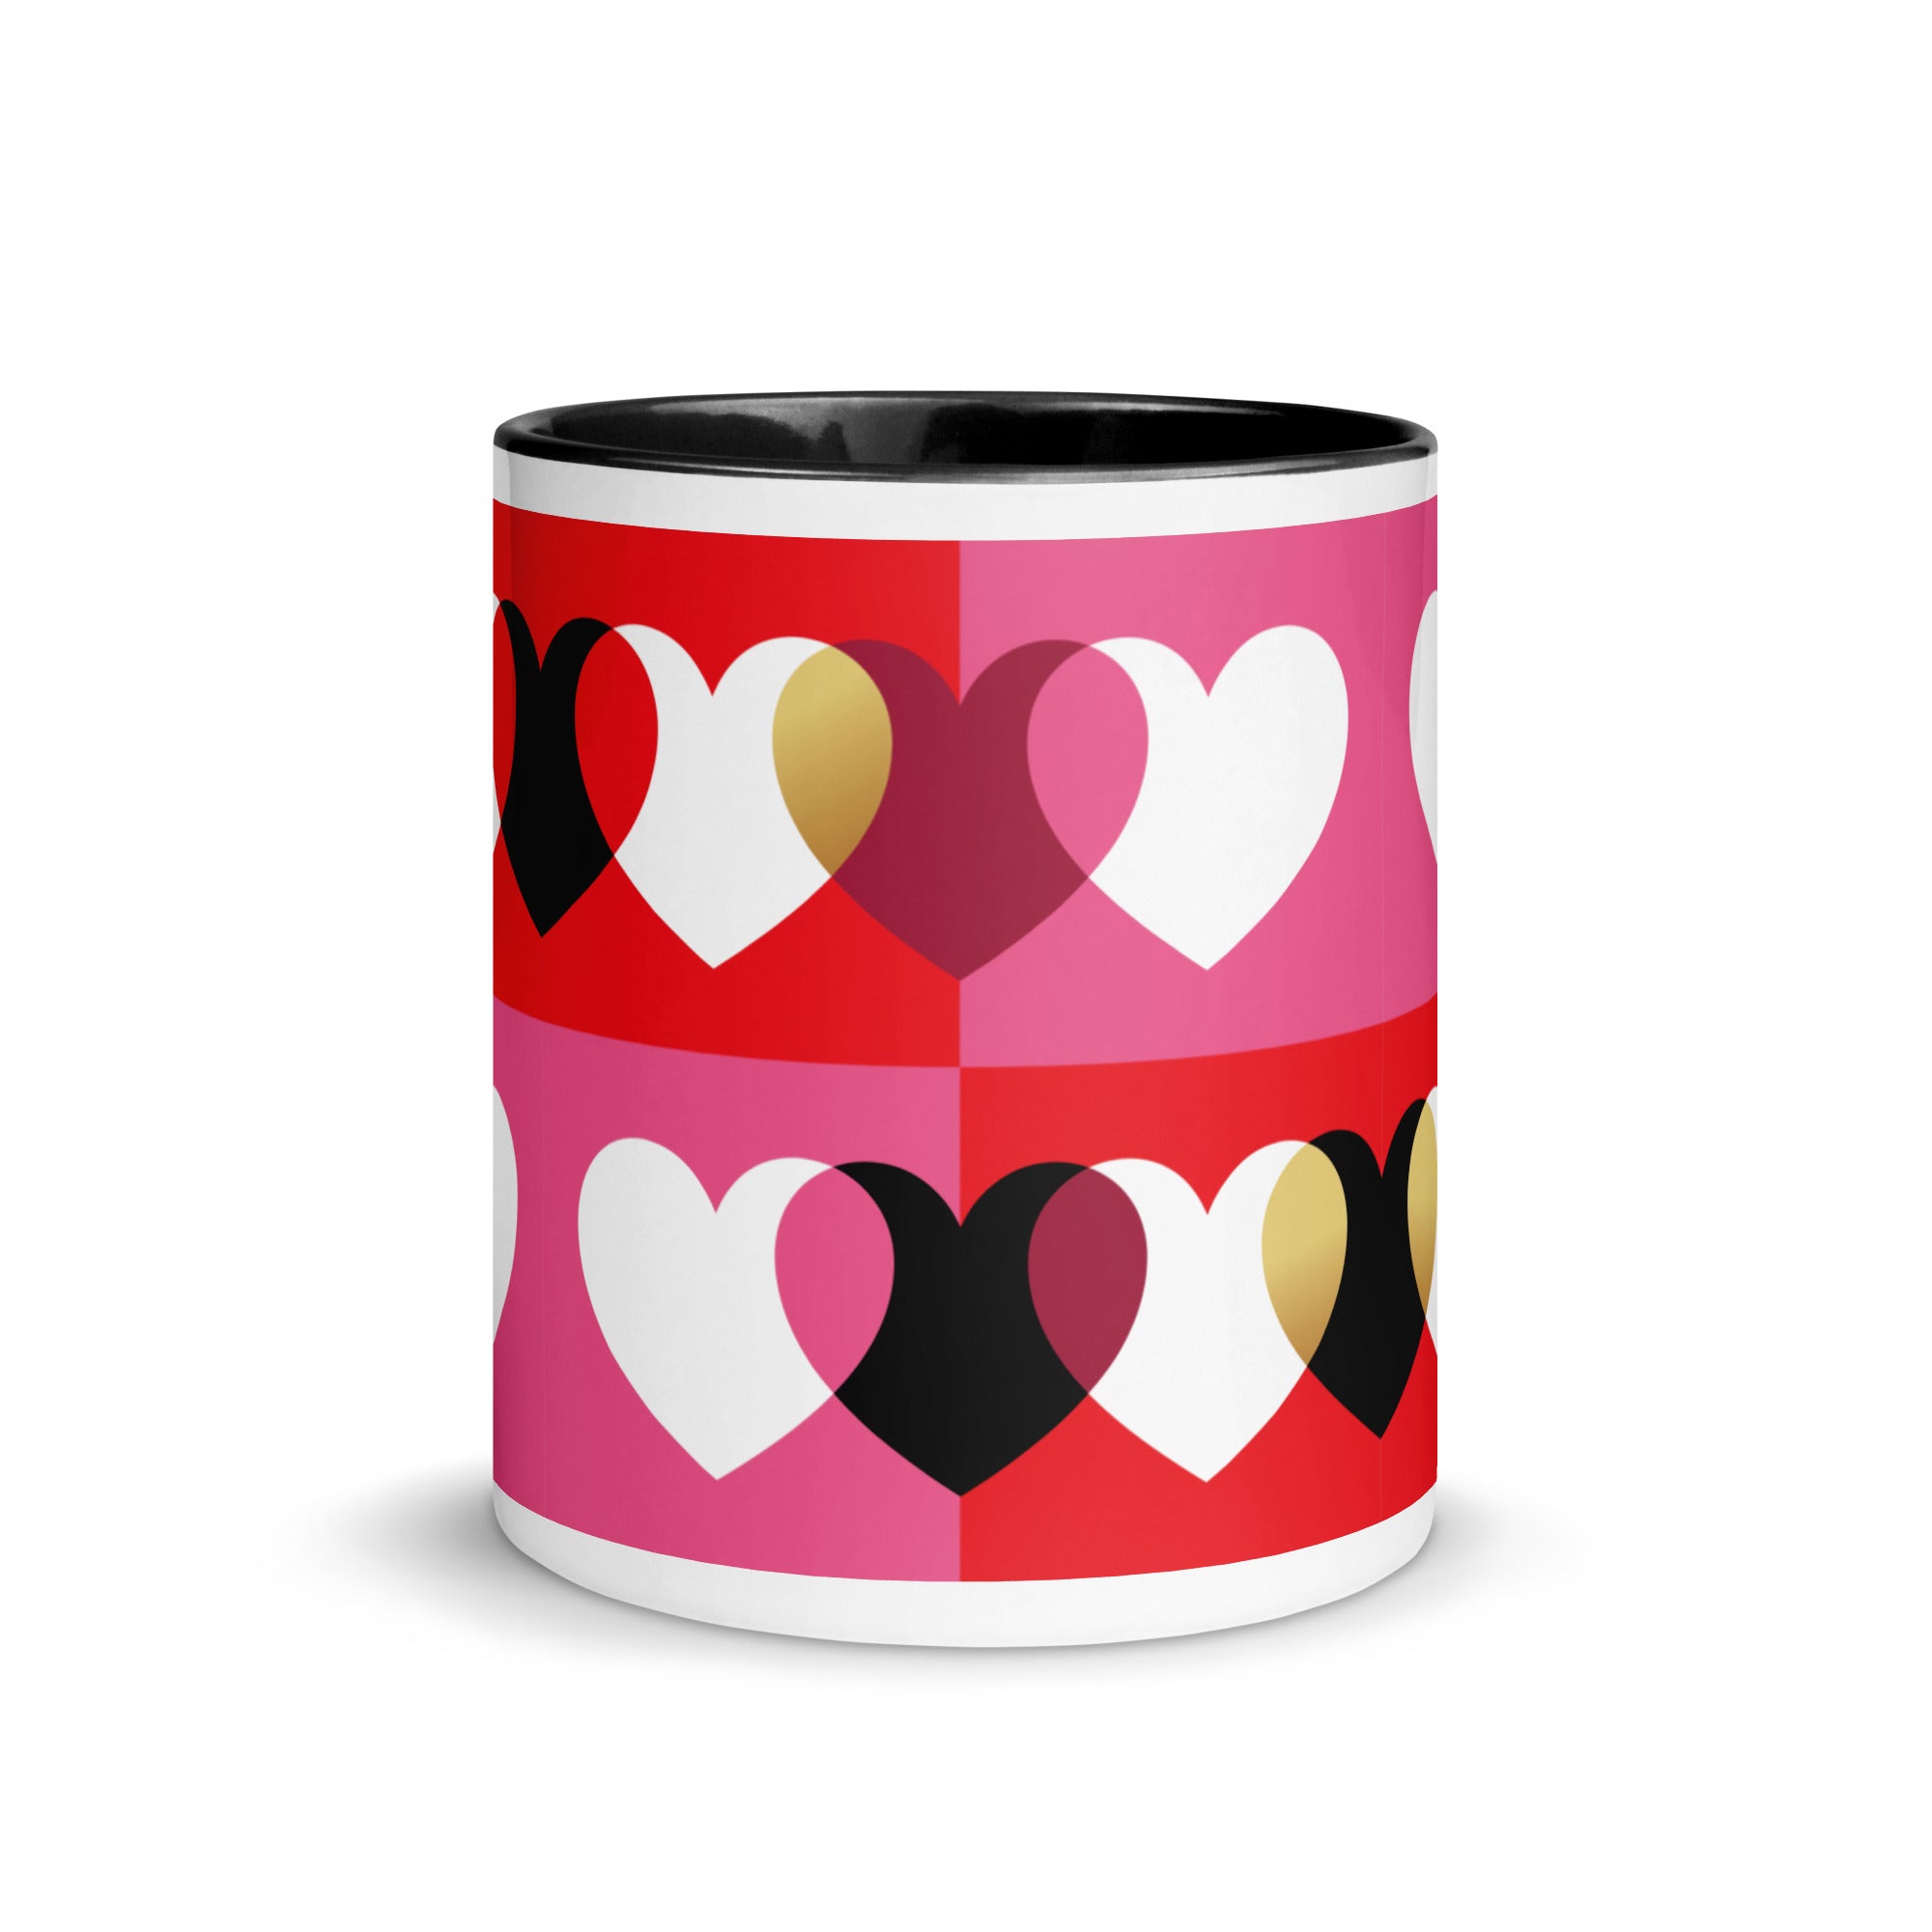 Love Mug set of 2, black and red, Mr. and Mrs, personalised-12